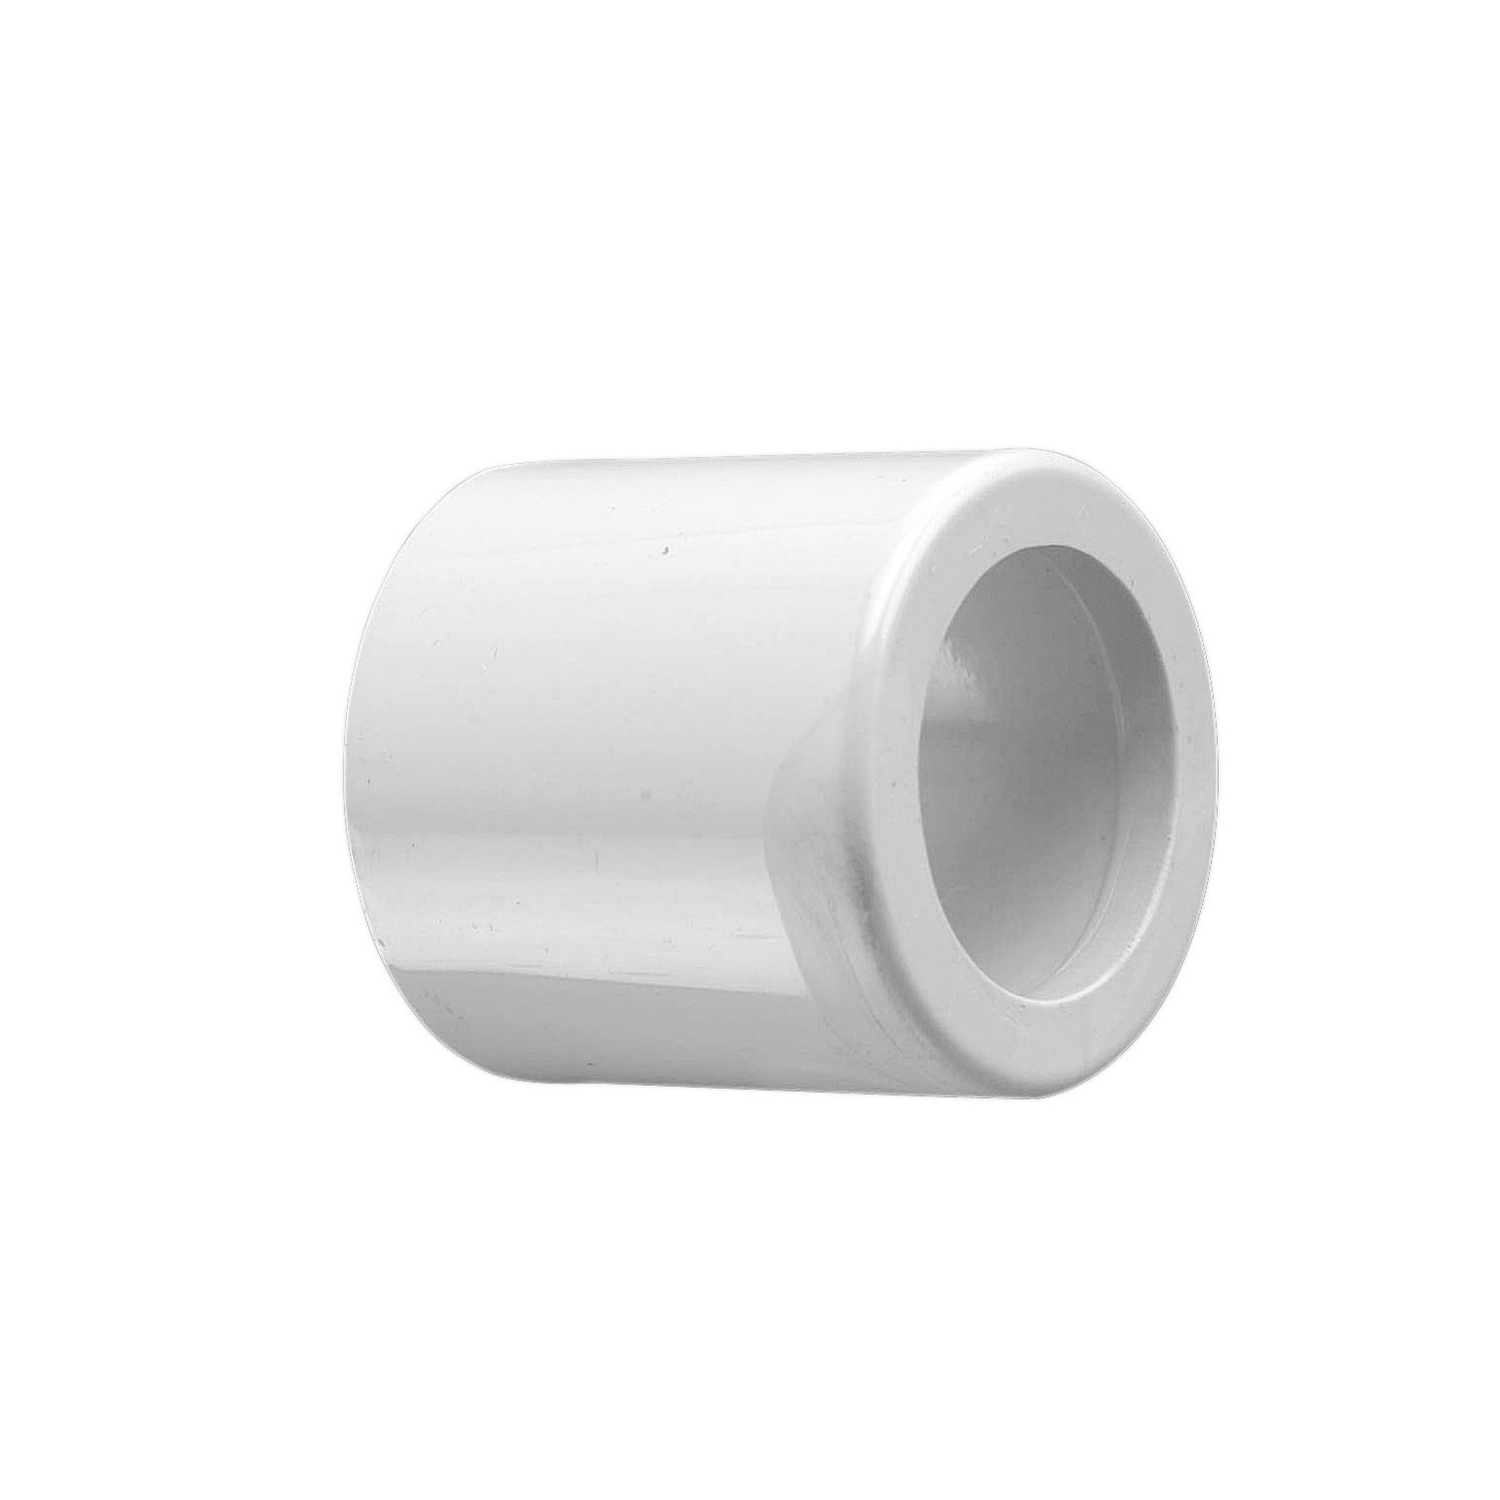 Solid Fittings - PVC, Plain Reducers, 20mm - 16mm, Grey